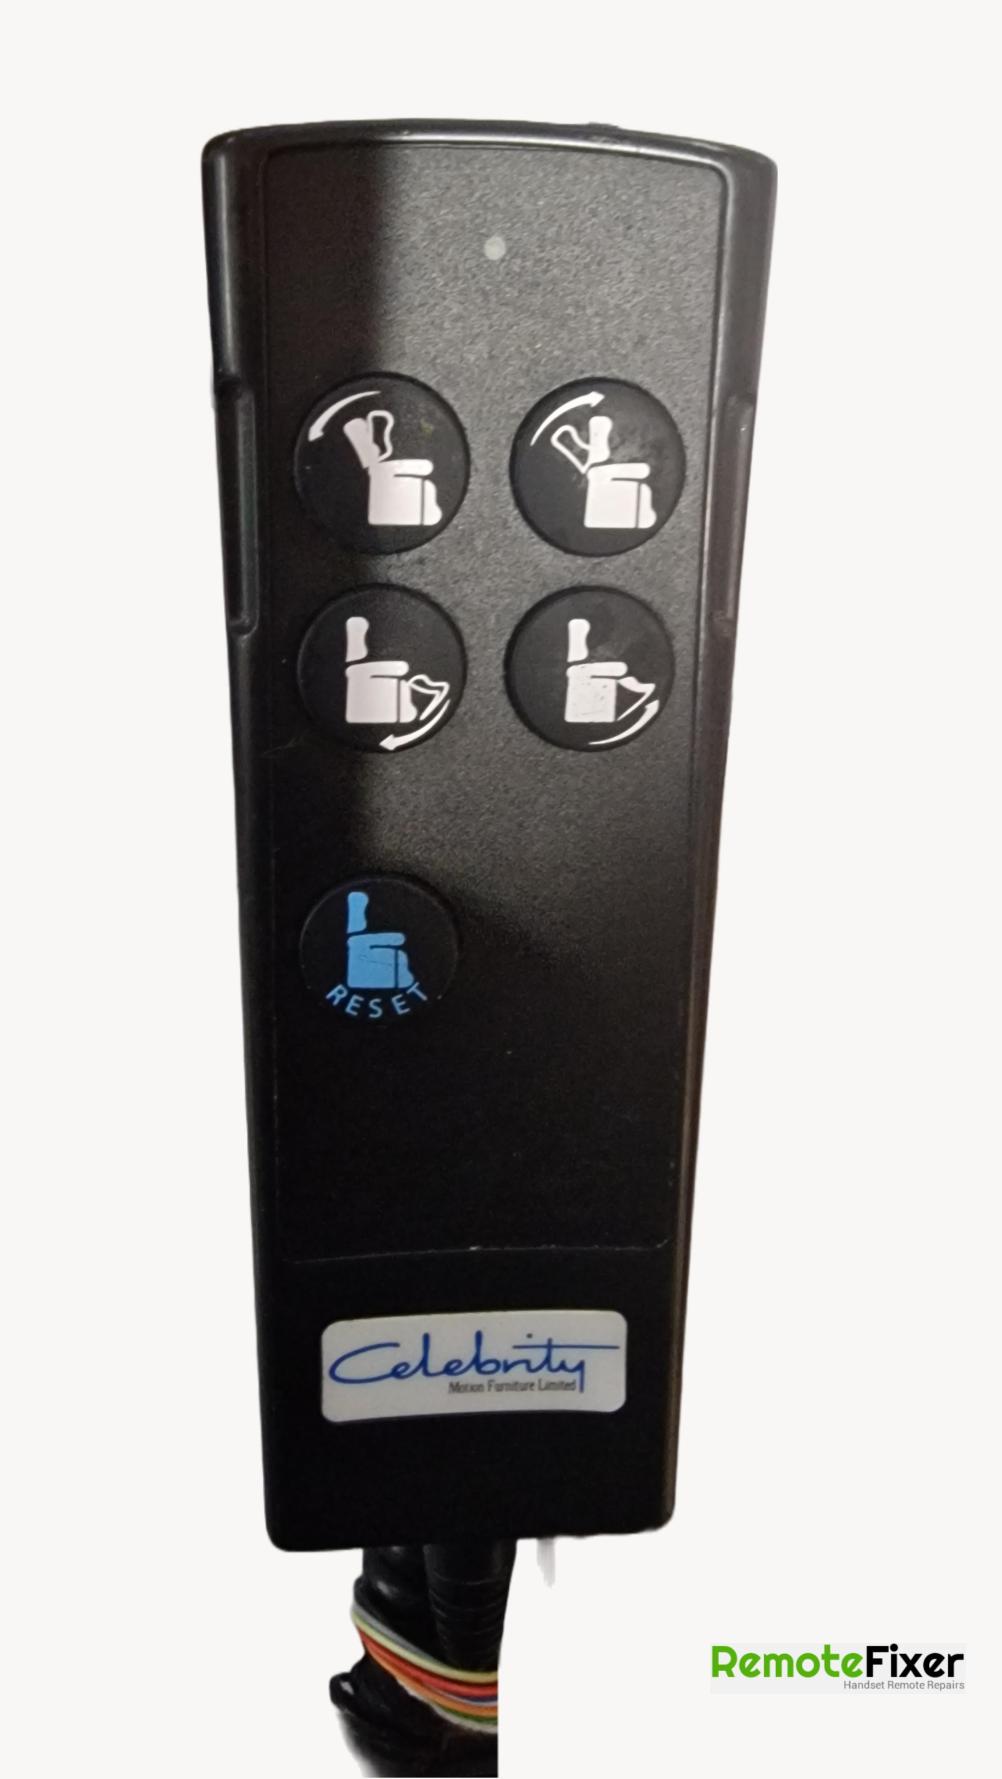 Celebrity  Remote Control - Front Image